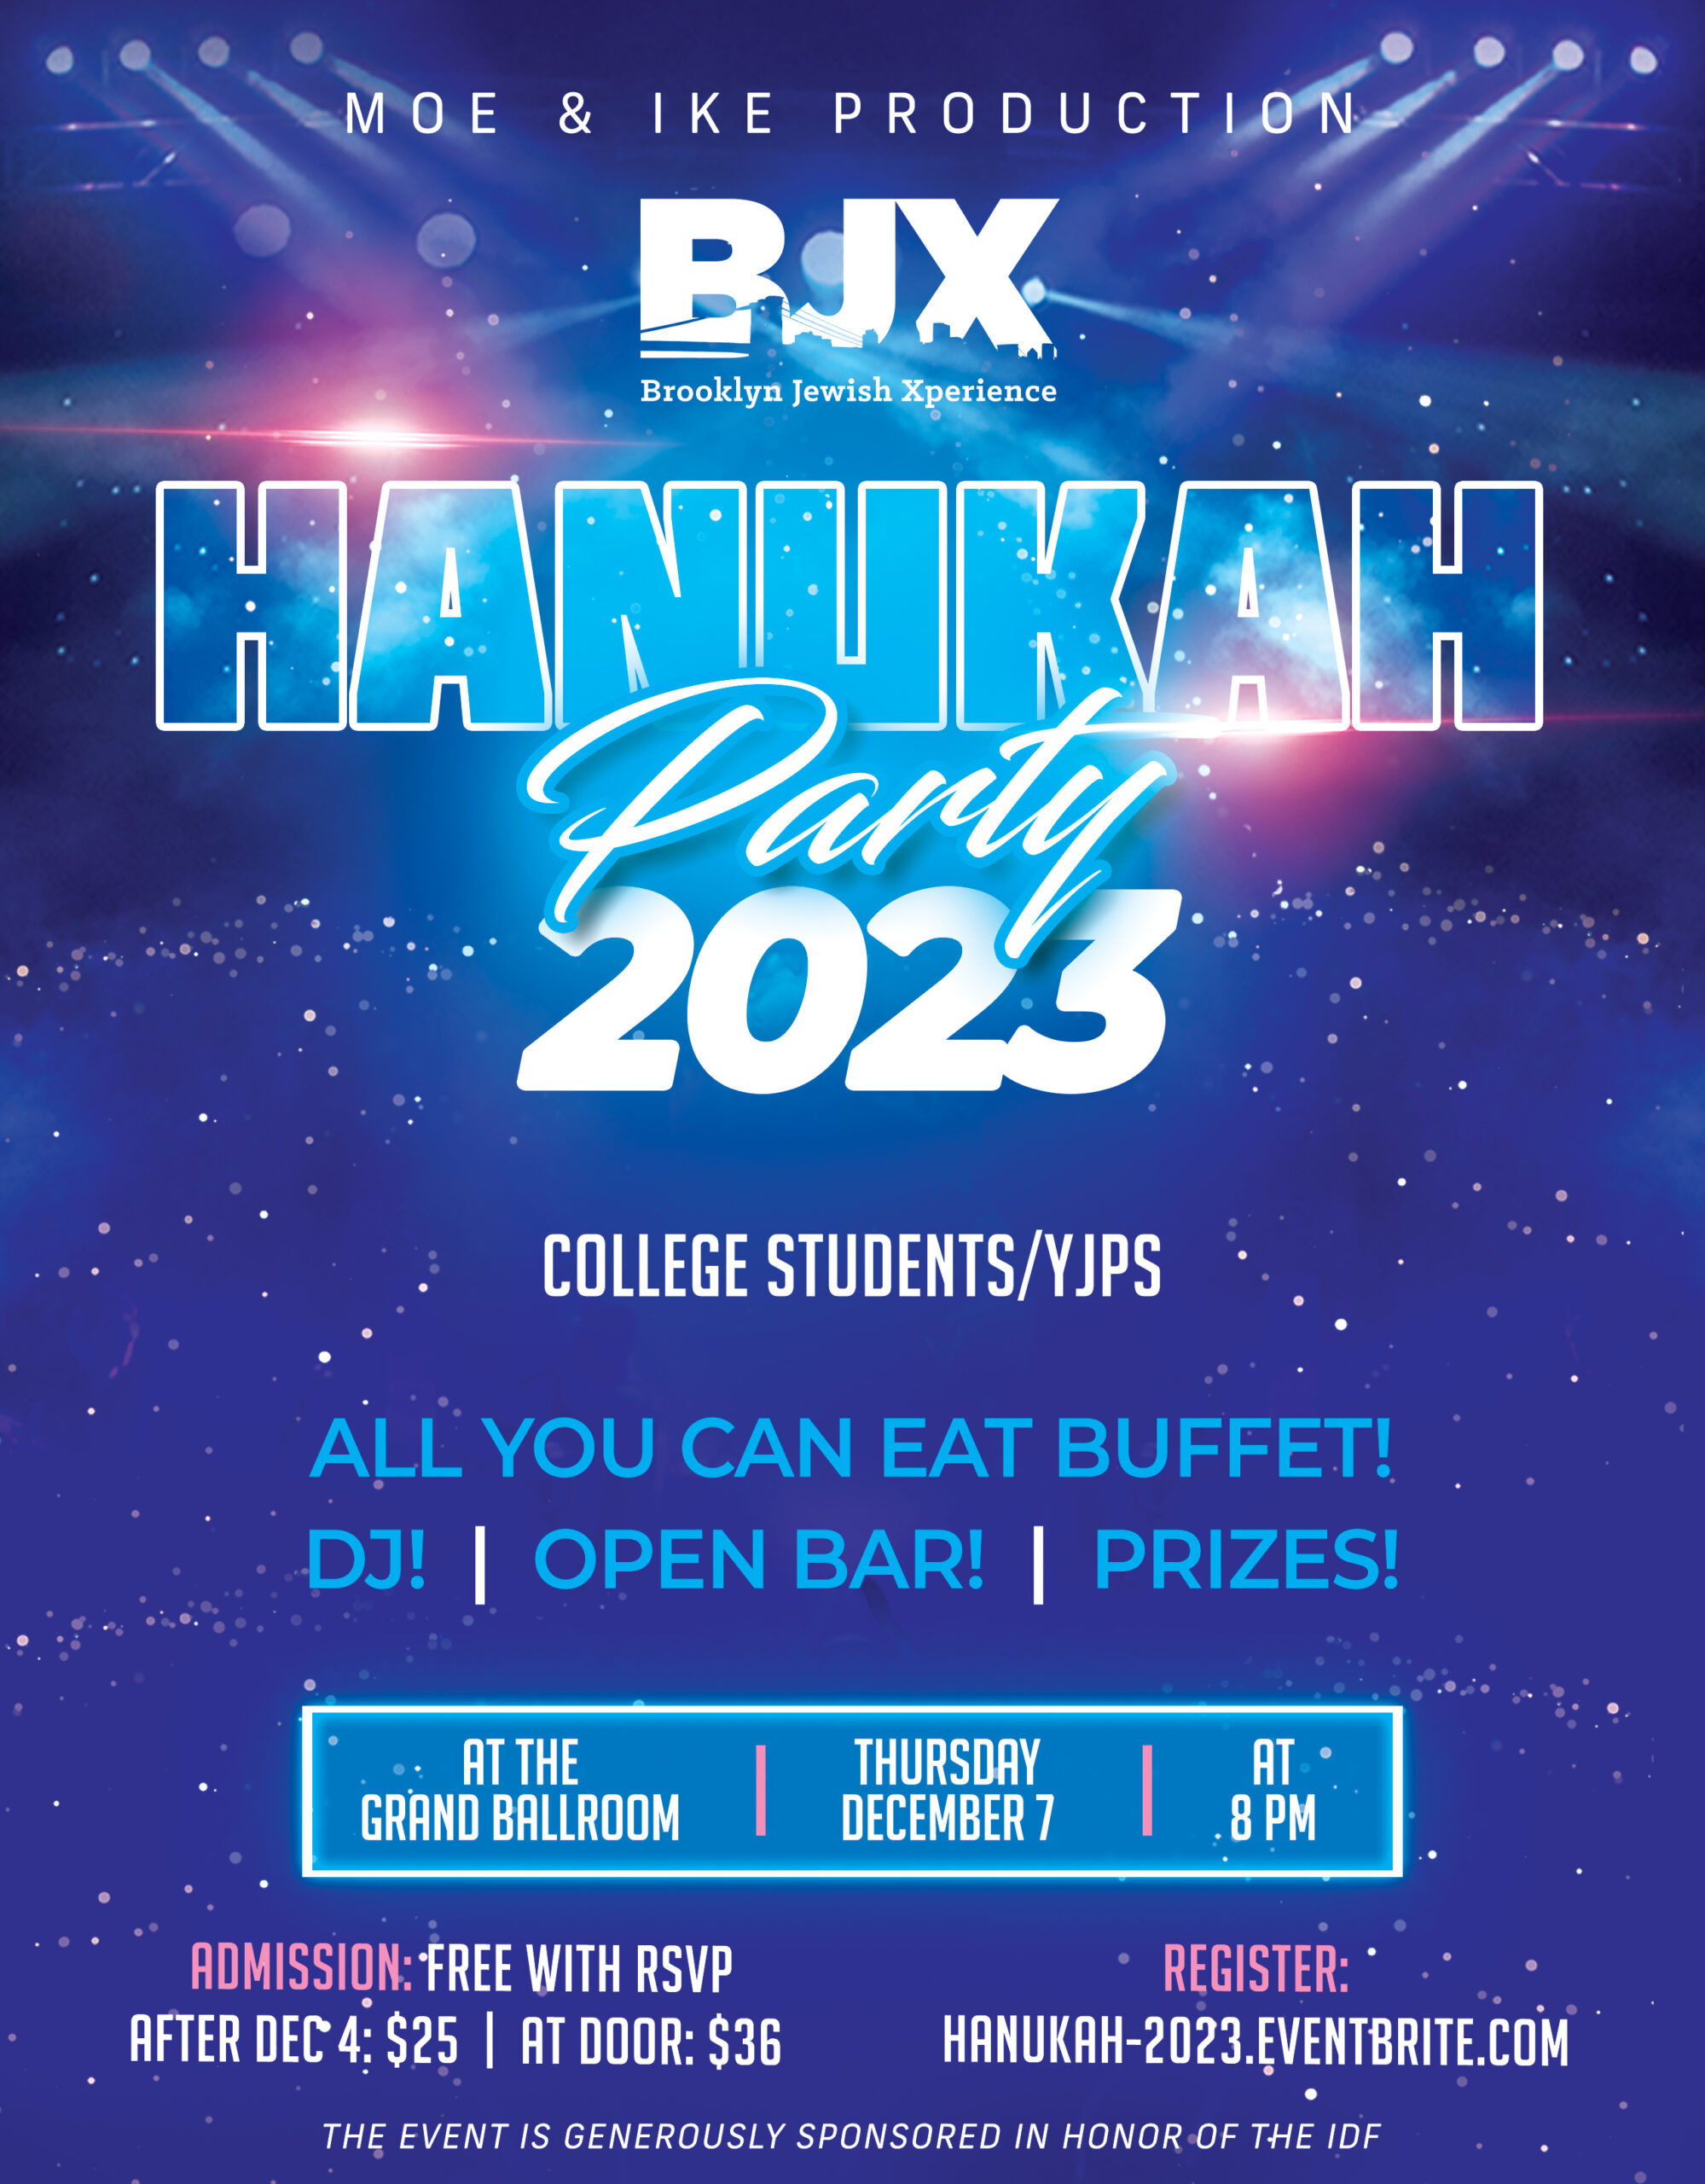 Hanukkah Event for Young Professional and College Students